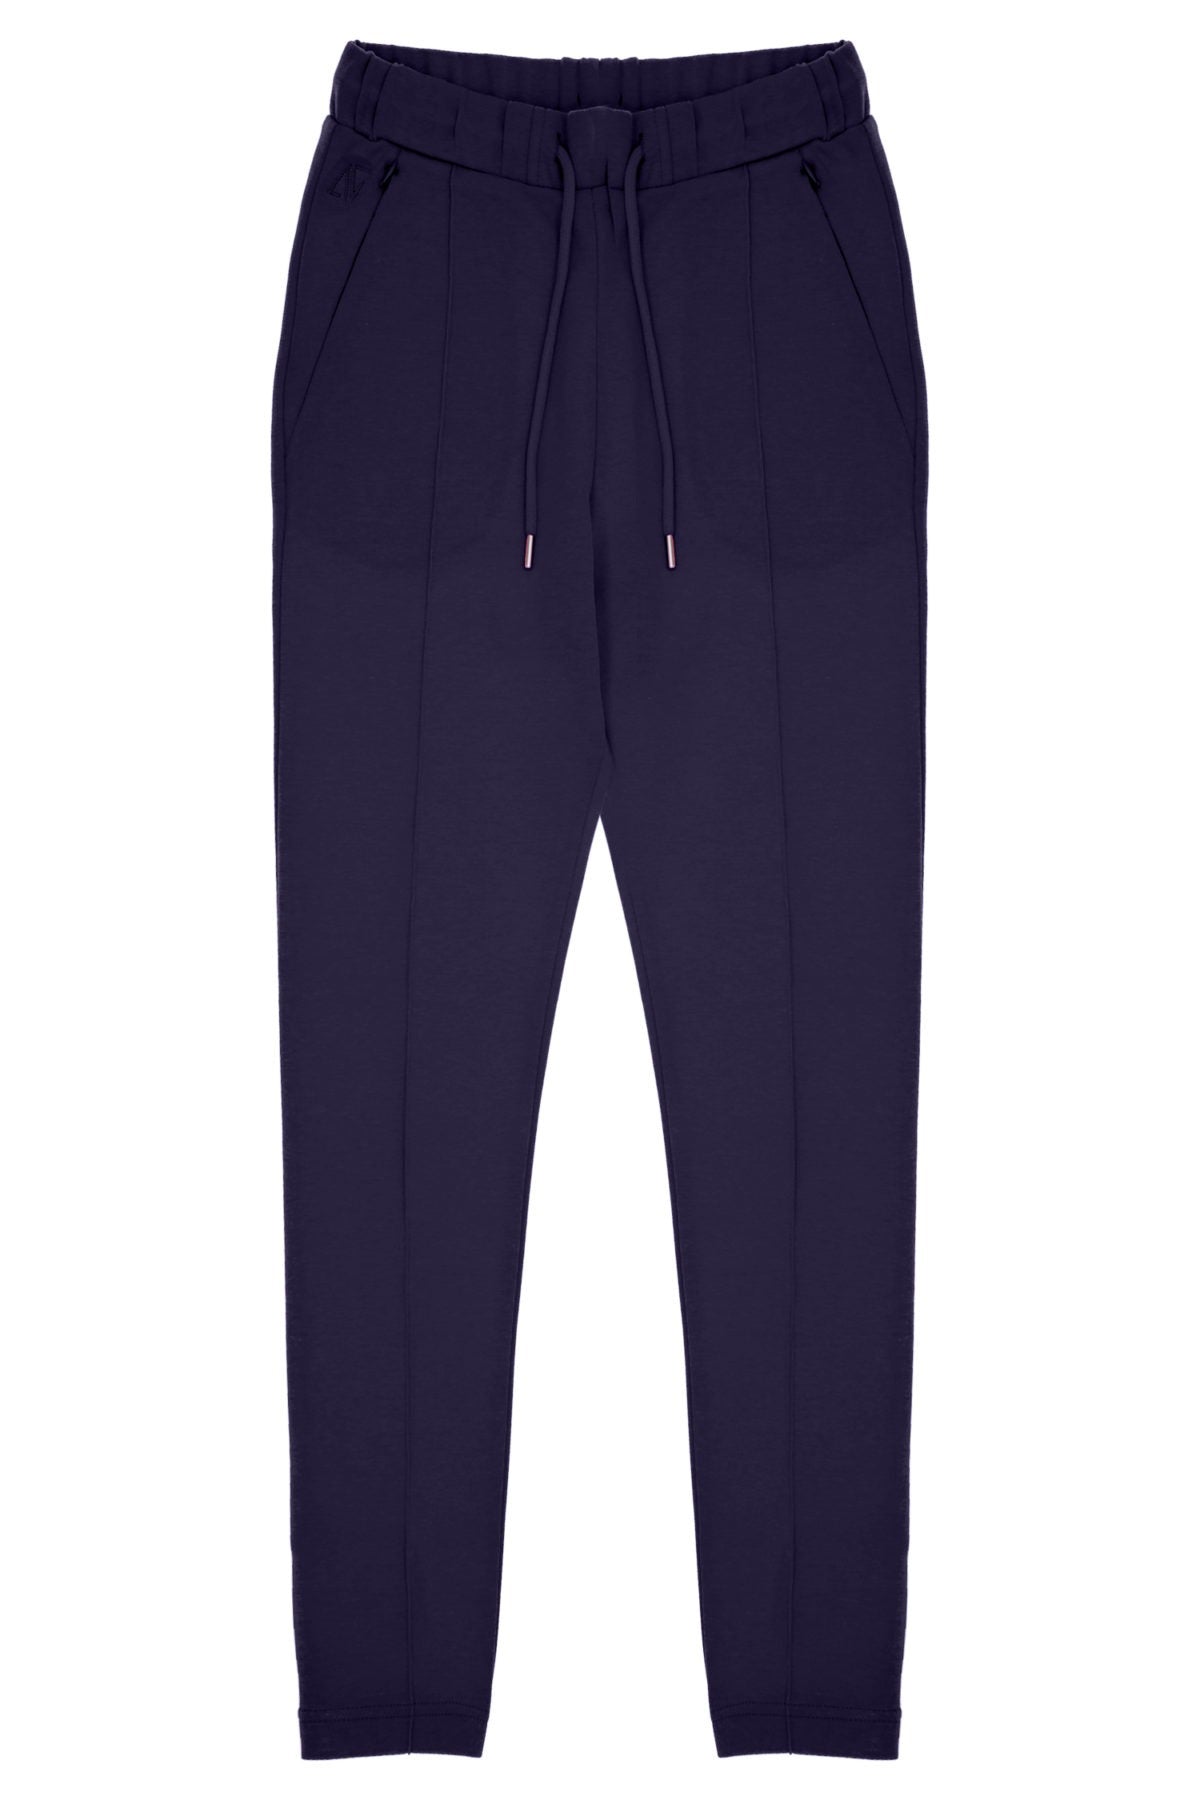 Load image into Gallery viewer, Cotton Skinny Sweatpants - Dark Navy
